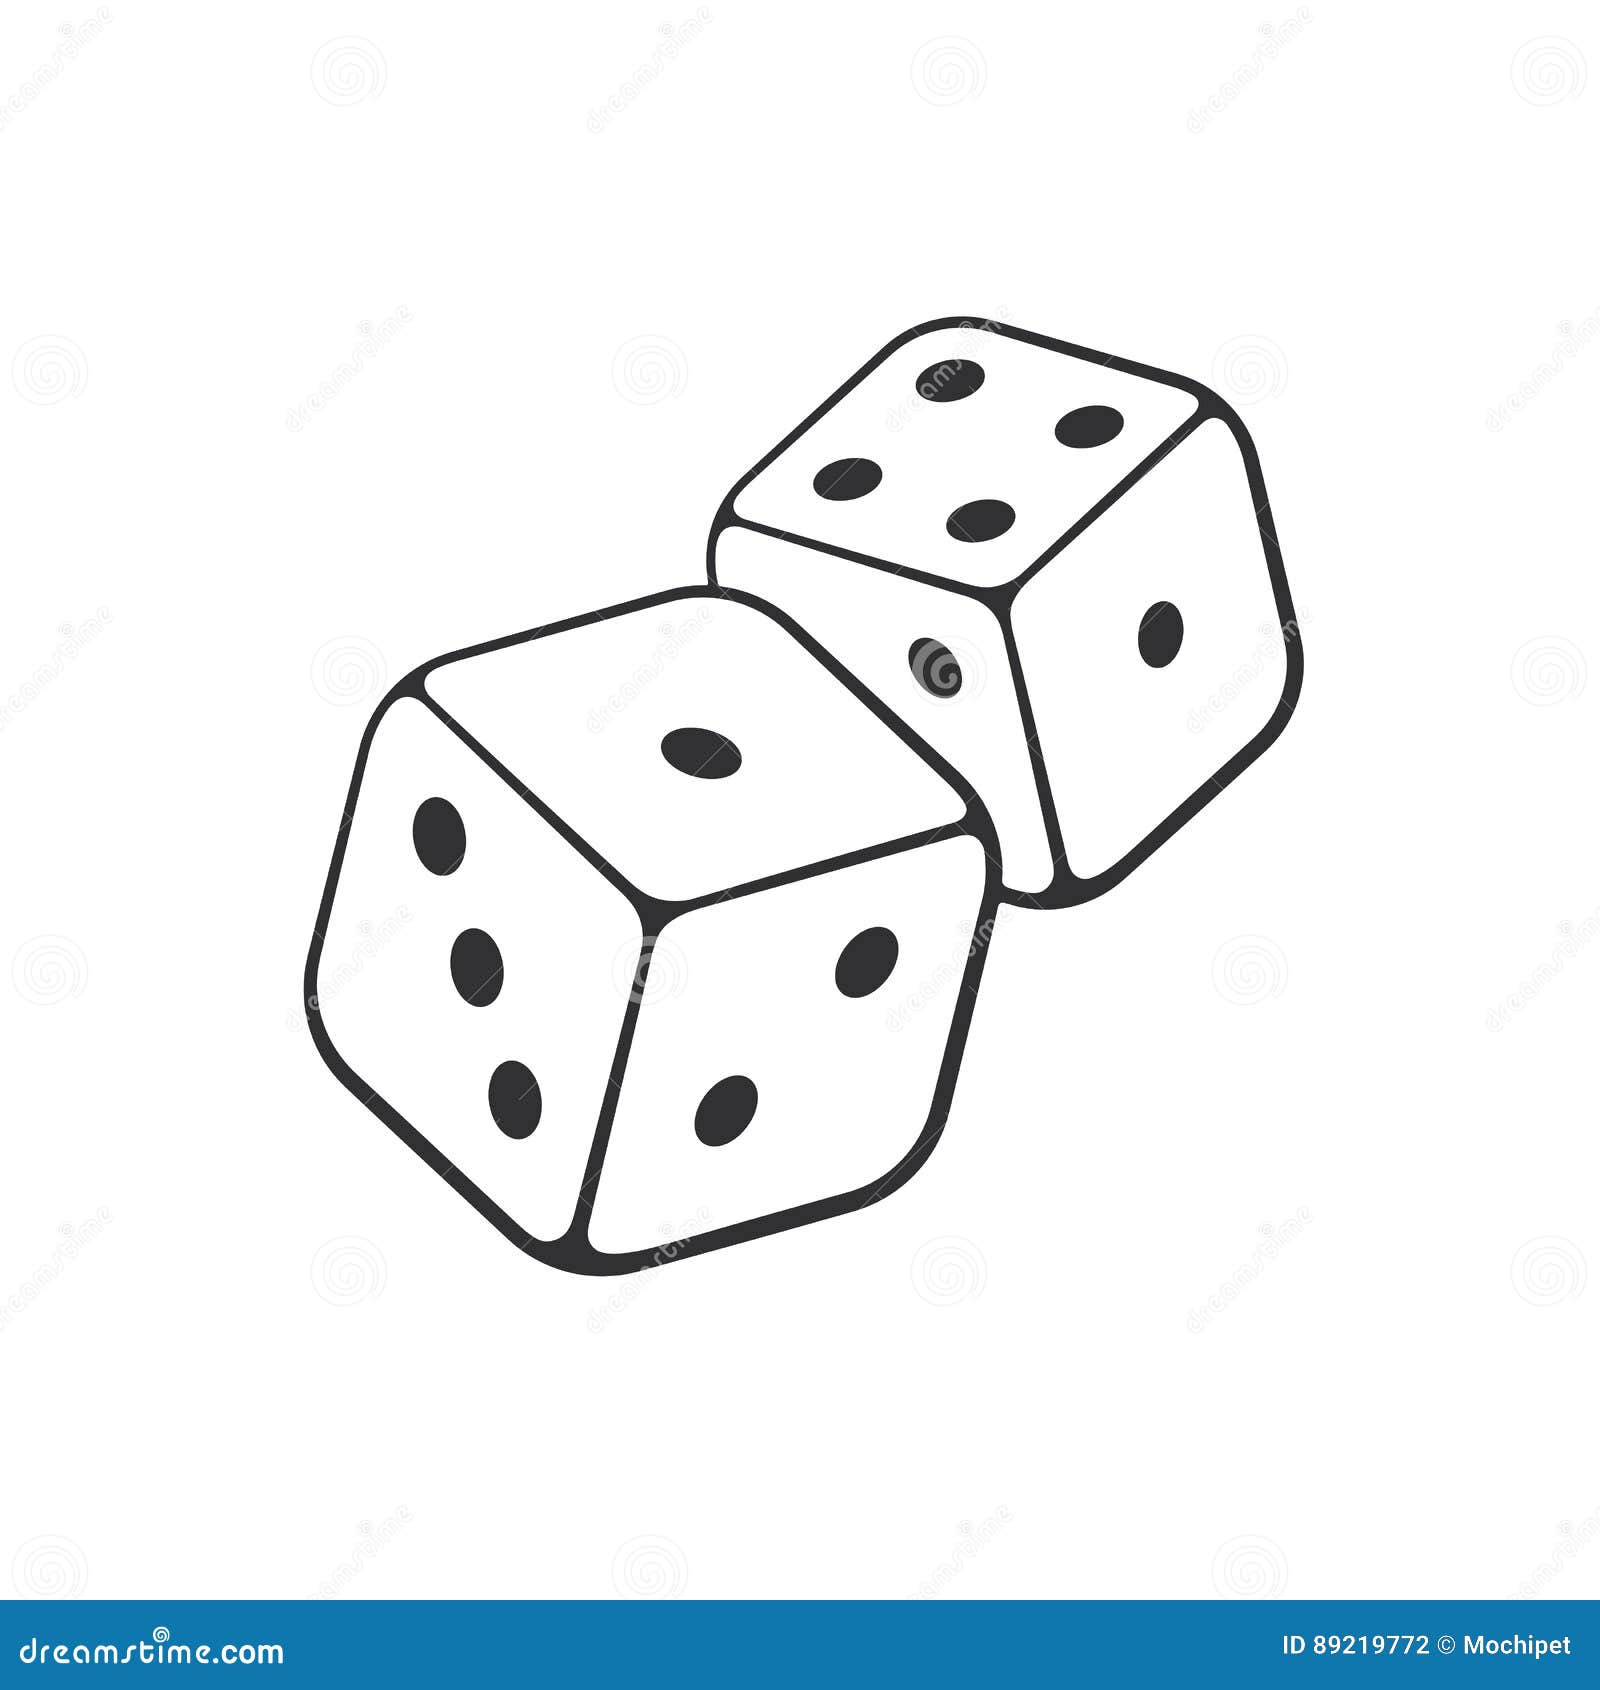 doodle of two dice with contour